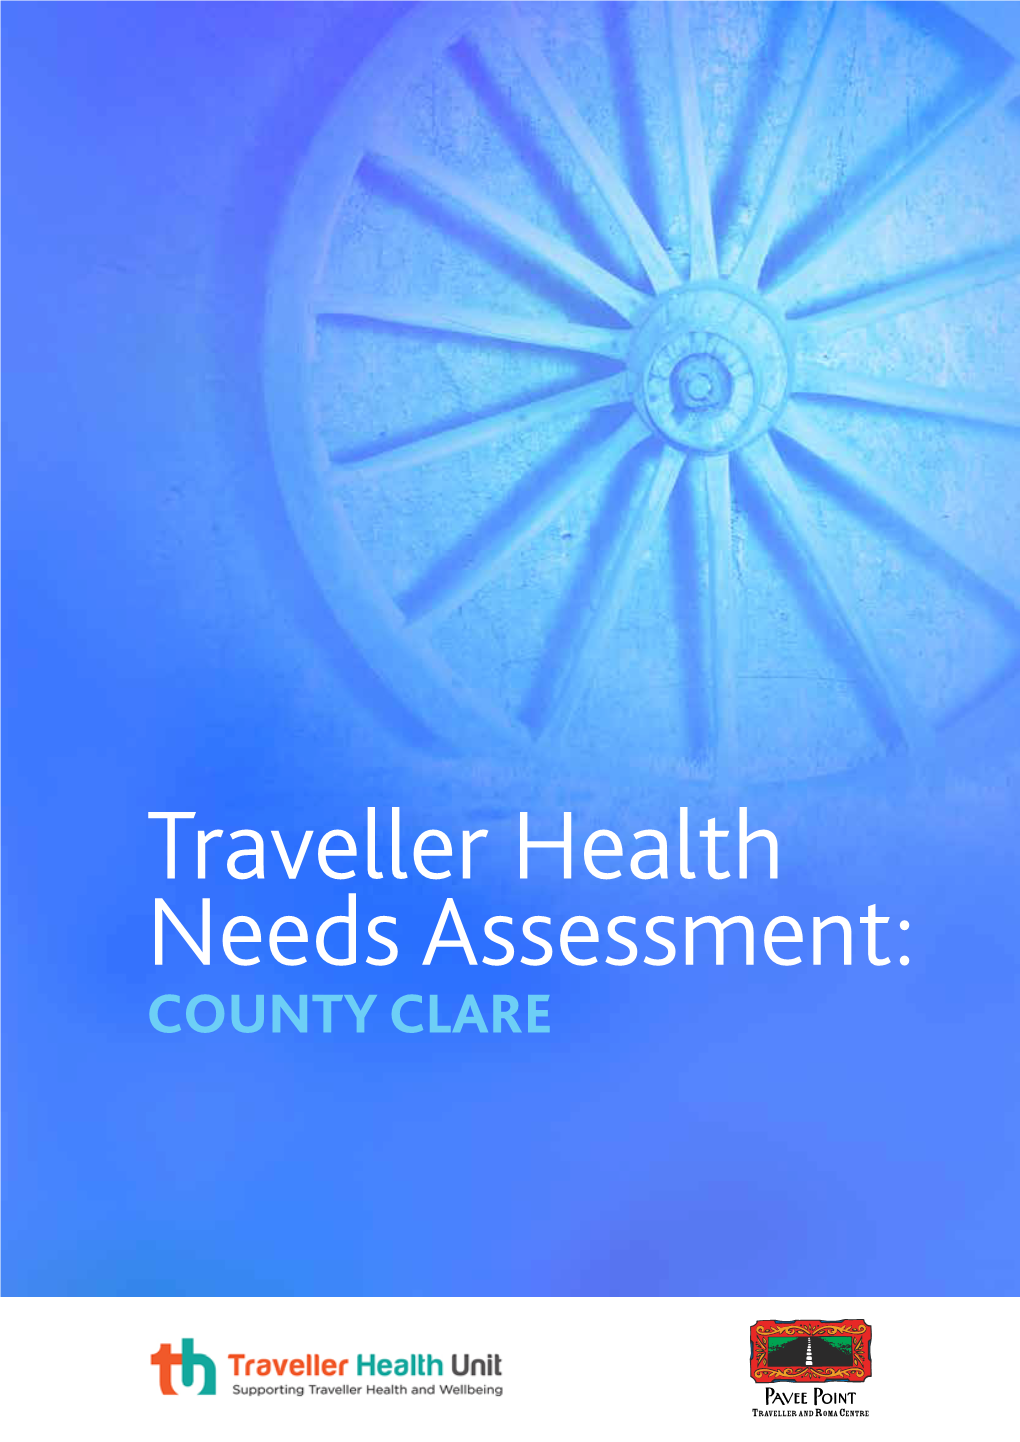 Traveller Health Needs Assessment: COUNTY CLARE